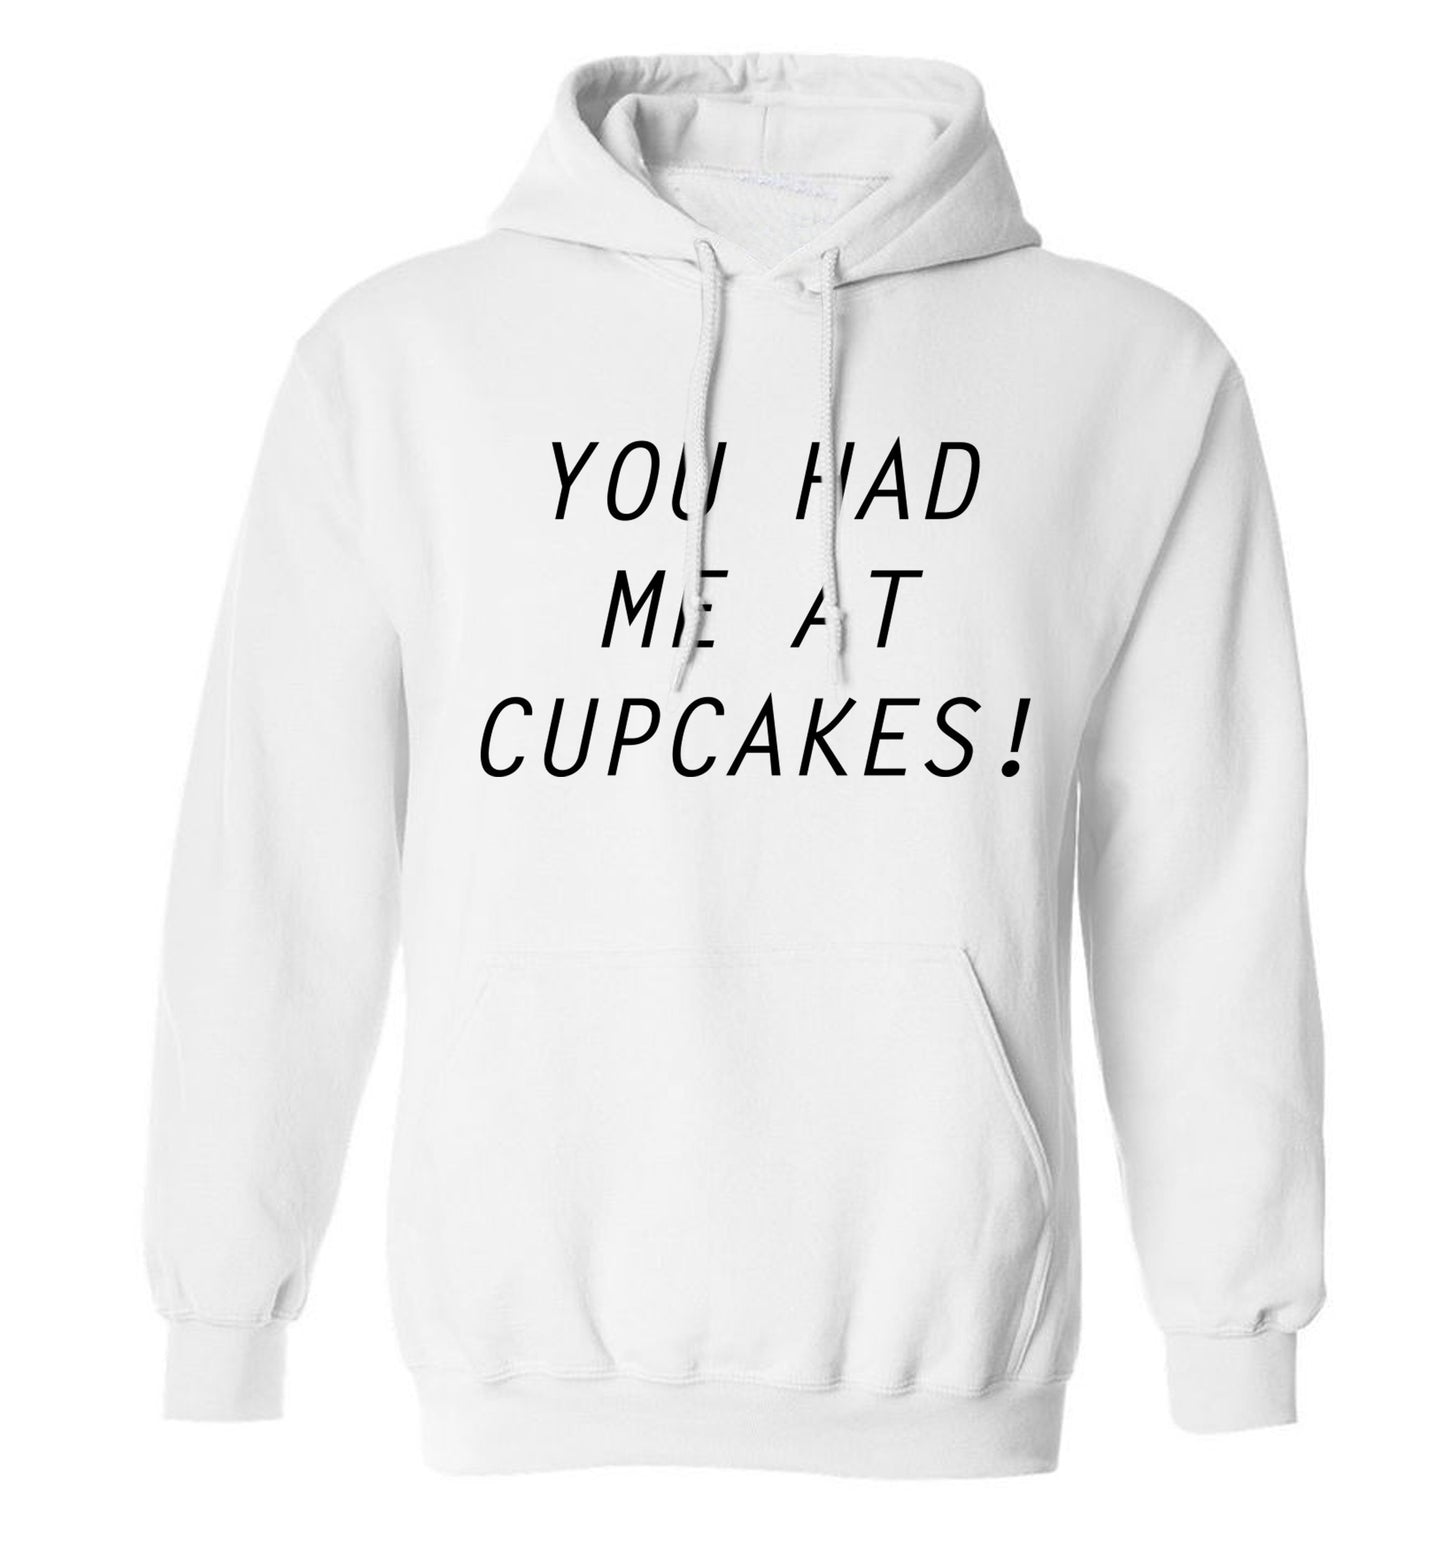 You had me at cupcakes adults unisex white hoodie 2XL